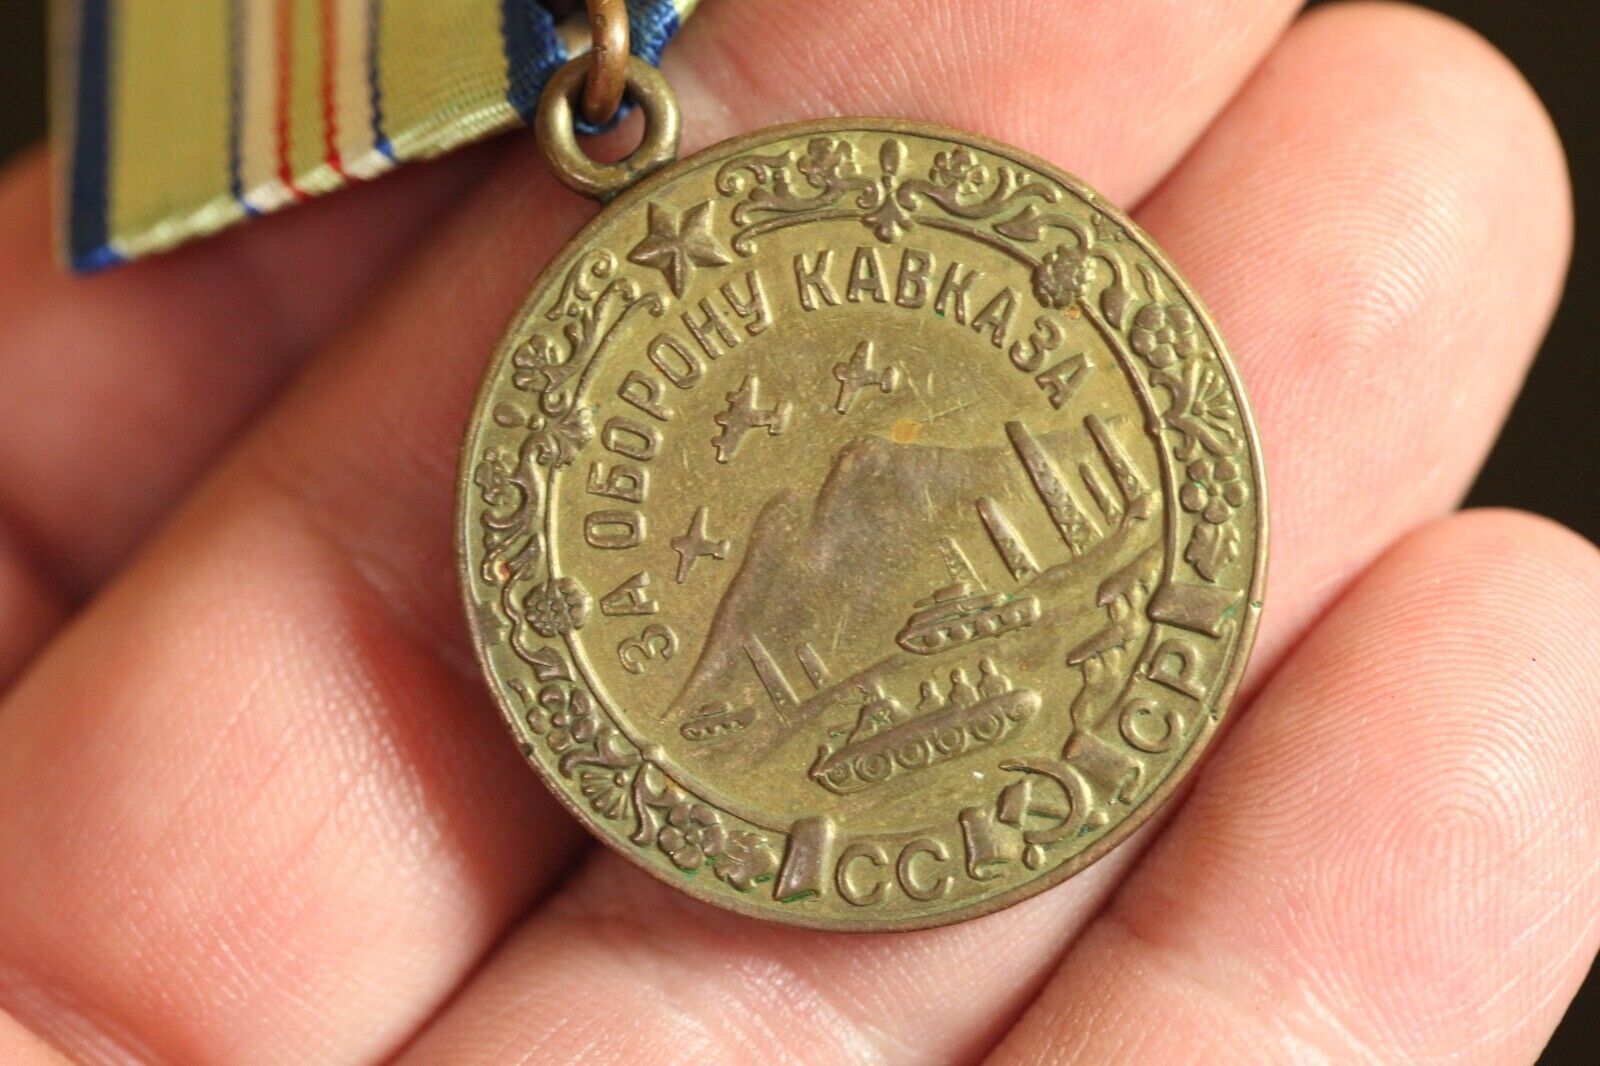 Original USSR Soviet WWII Red Army Medal FOR THE DEFENCE OF CAUCASUS (1376)